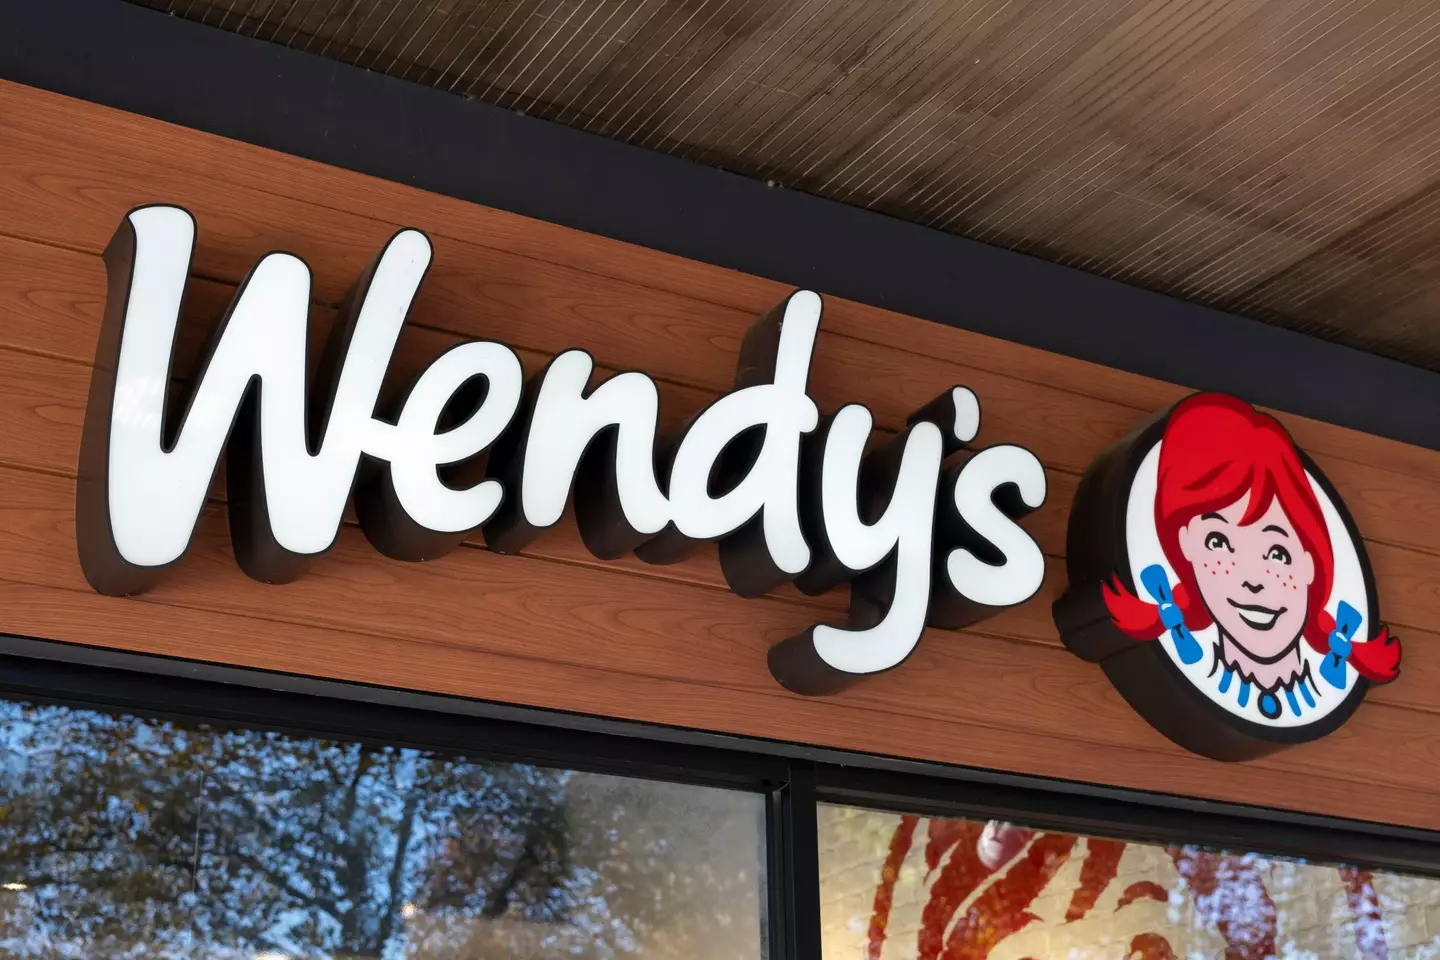 Wendy's is the second most popular fast food chain in the US.